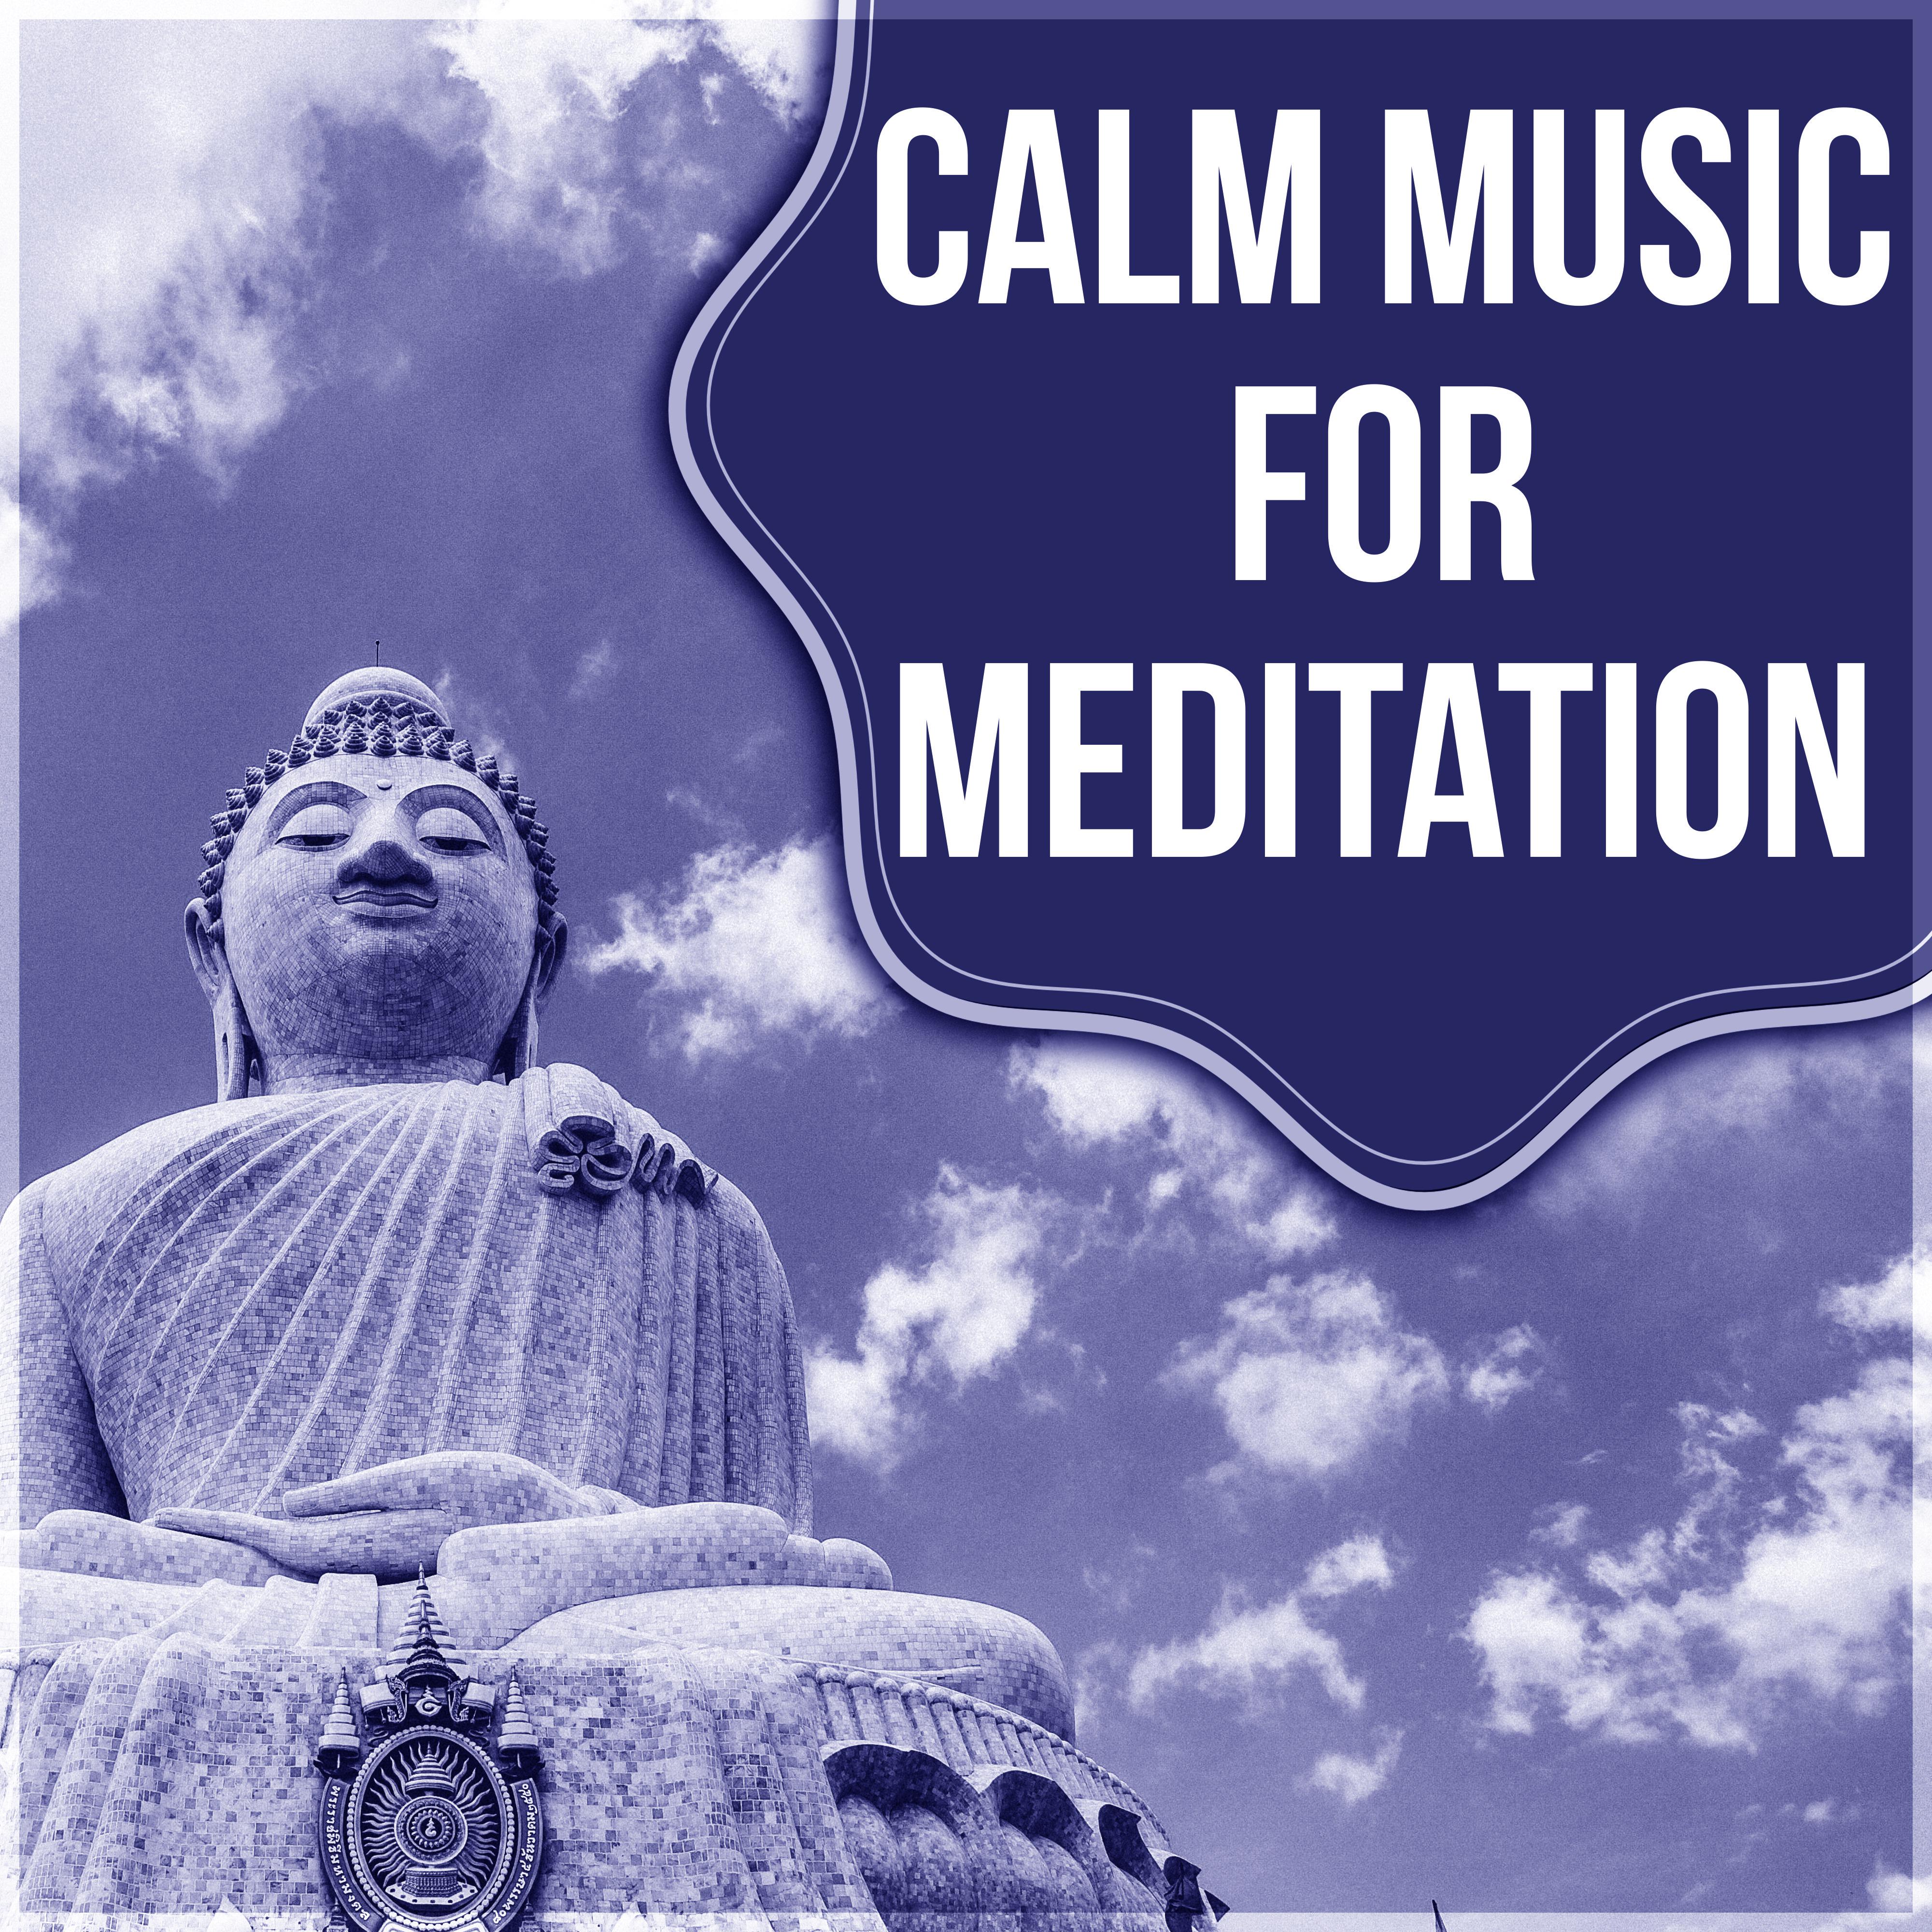 Calm Music for Meditation - Meditation Music, Calm Songs to Help You Relax, Healing Therapy